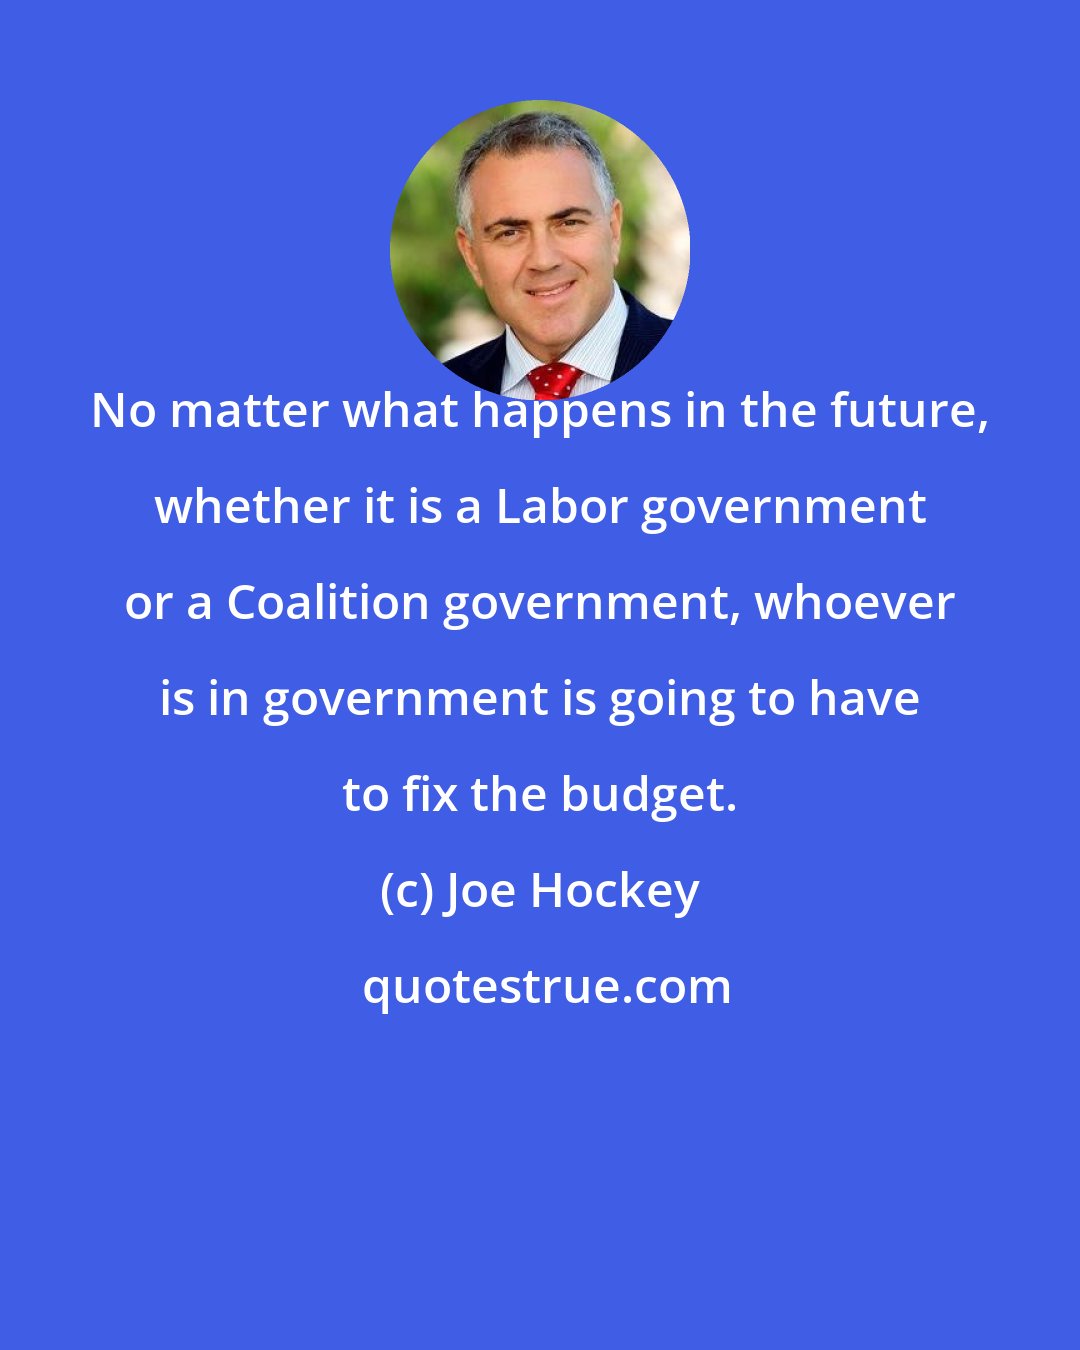 Joe Hockey: No matter what happens in the future, whether it is a Labor government or a Coalition government, whoever is in government is going to have to fix the budget.